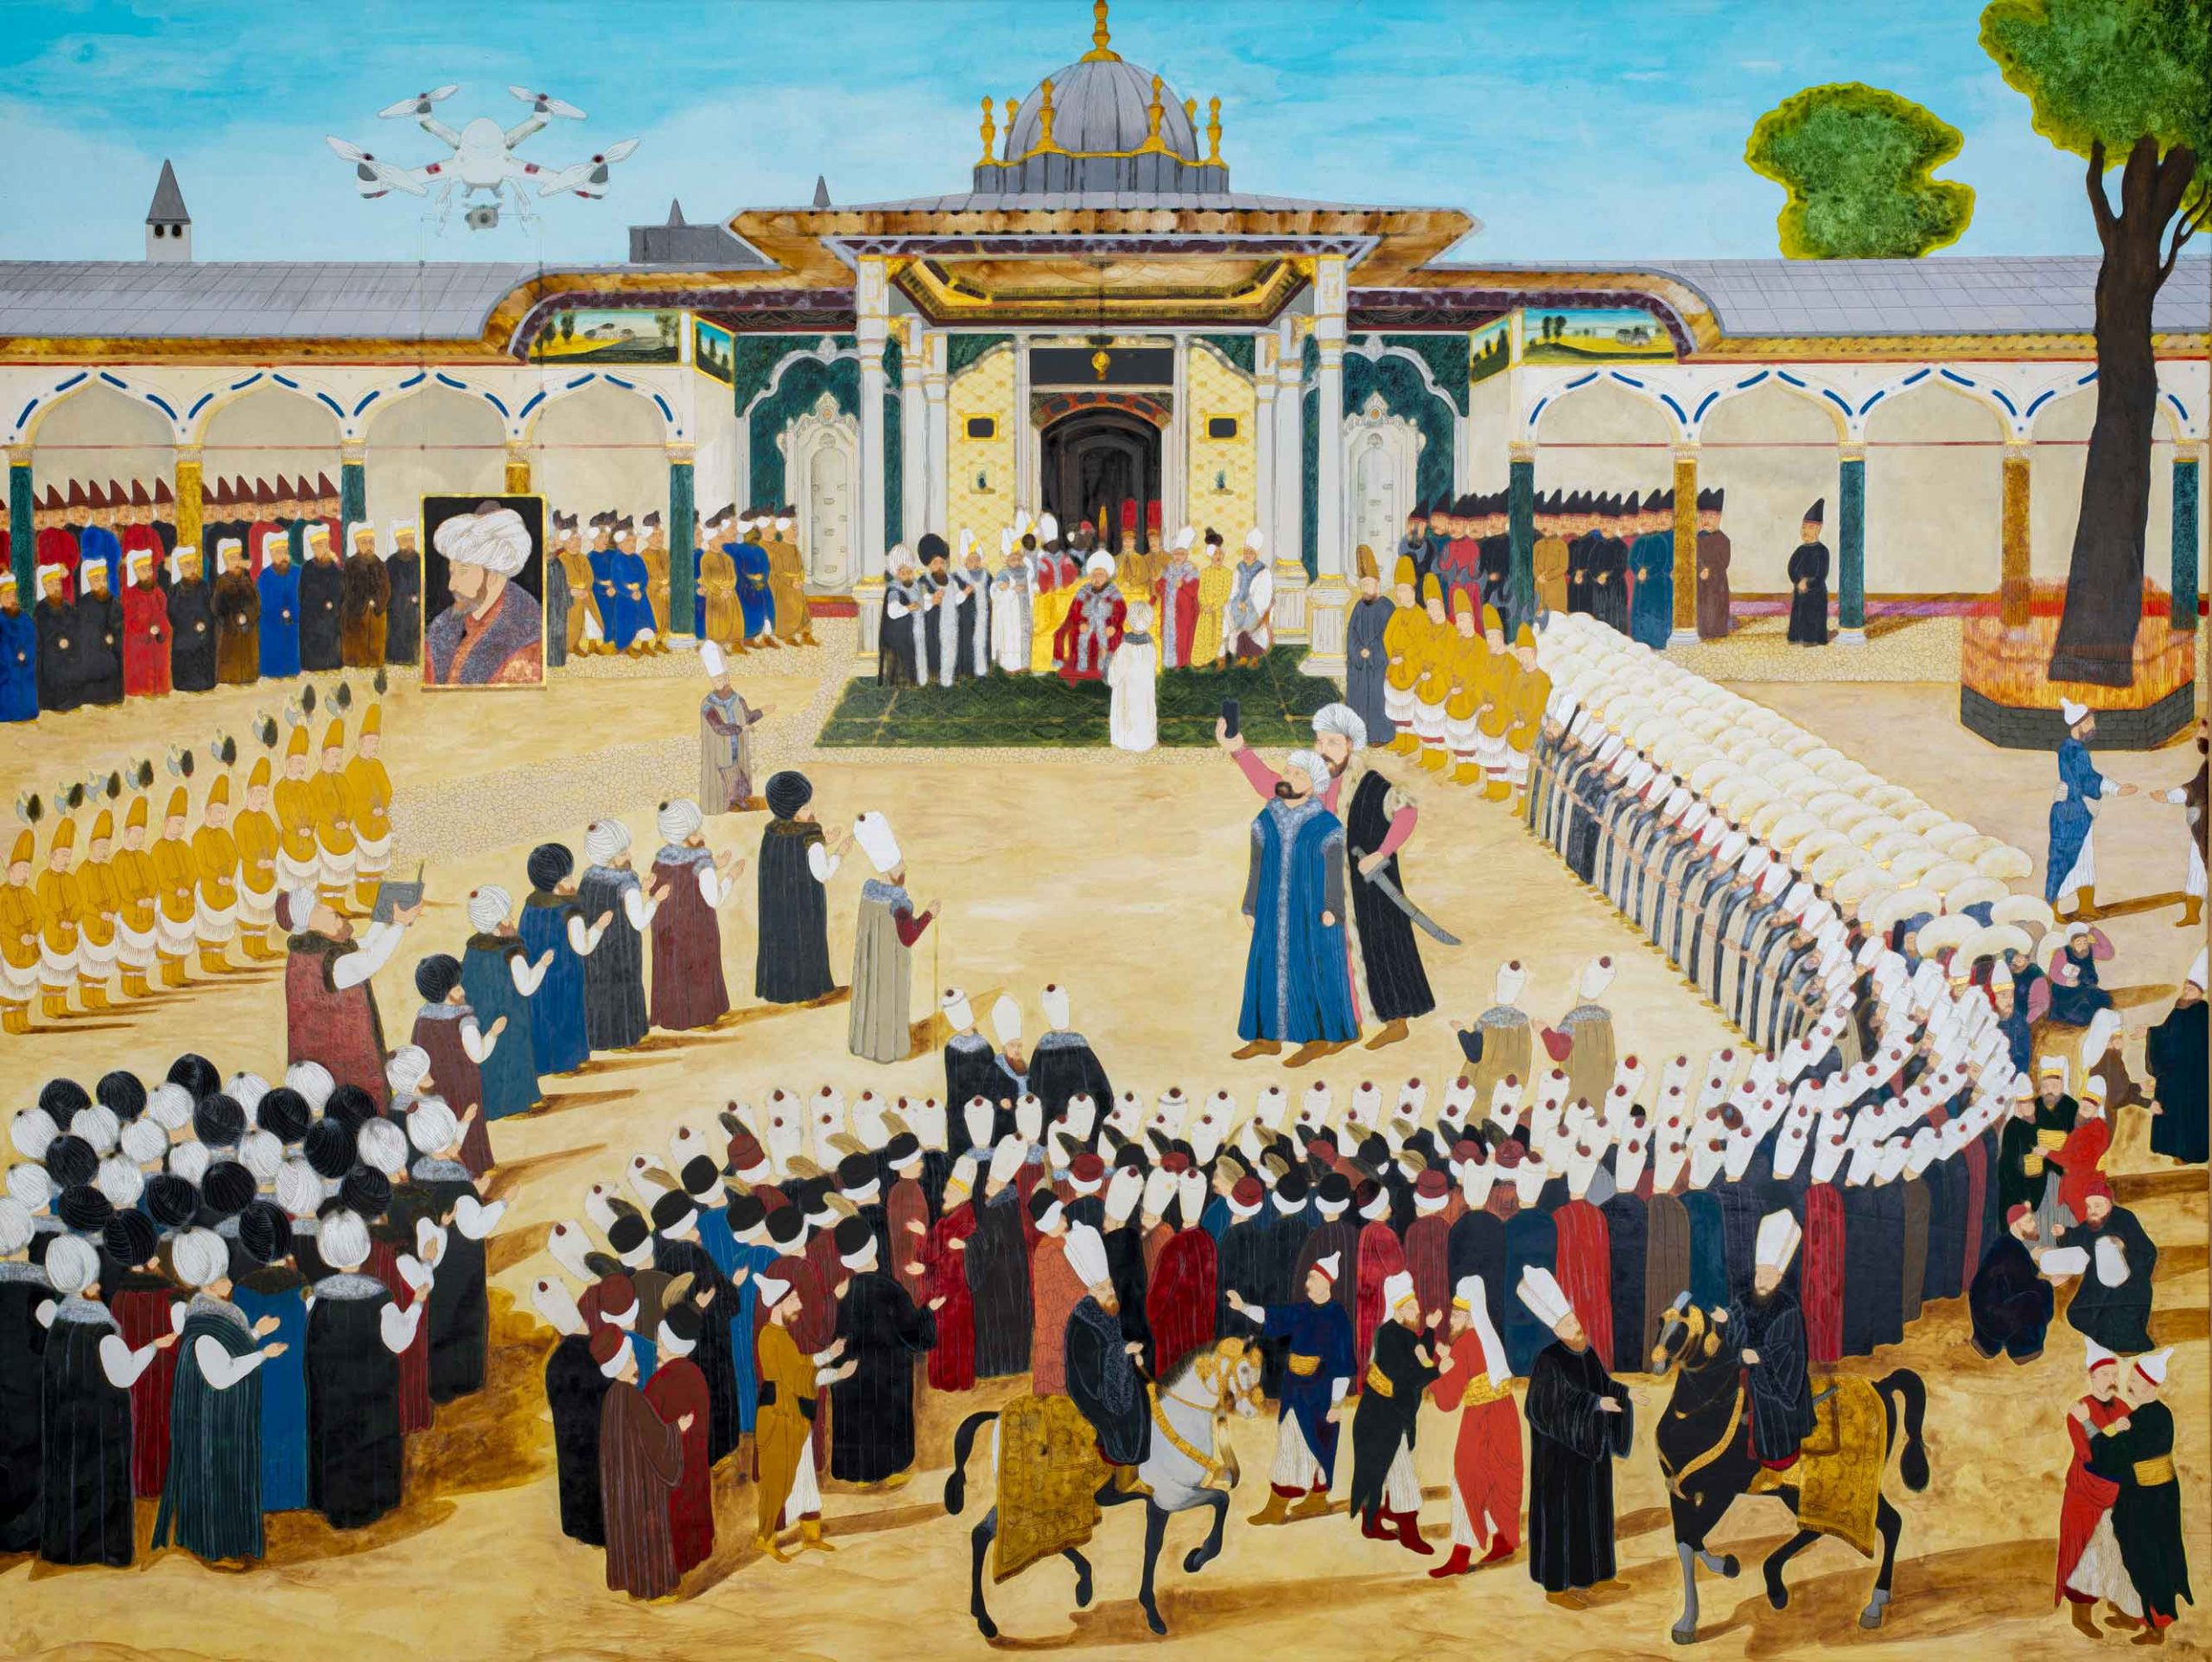 Sultan’s Accession to the Throne Ceremony with Drone (2018 ) by Halil Altındere